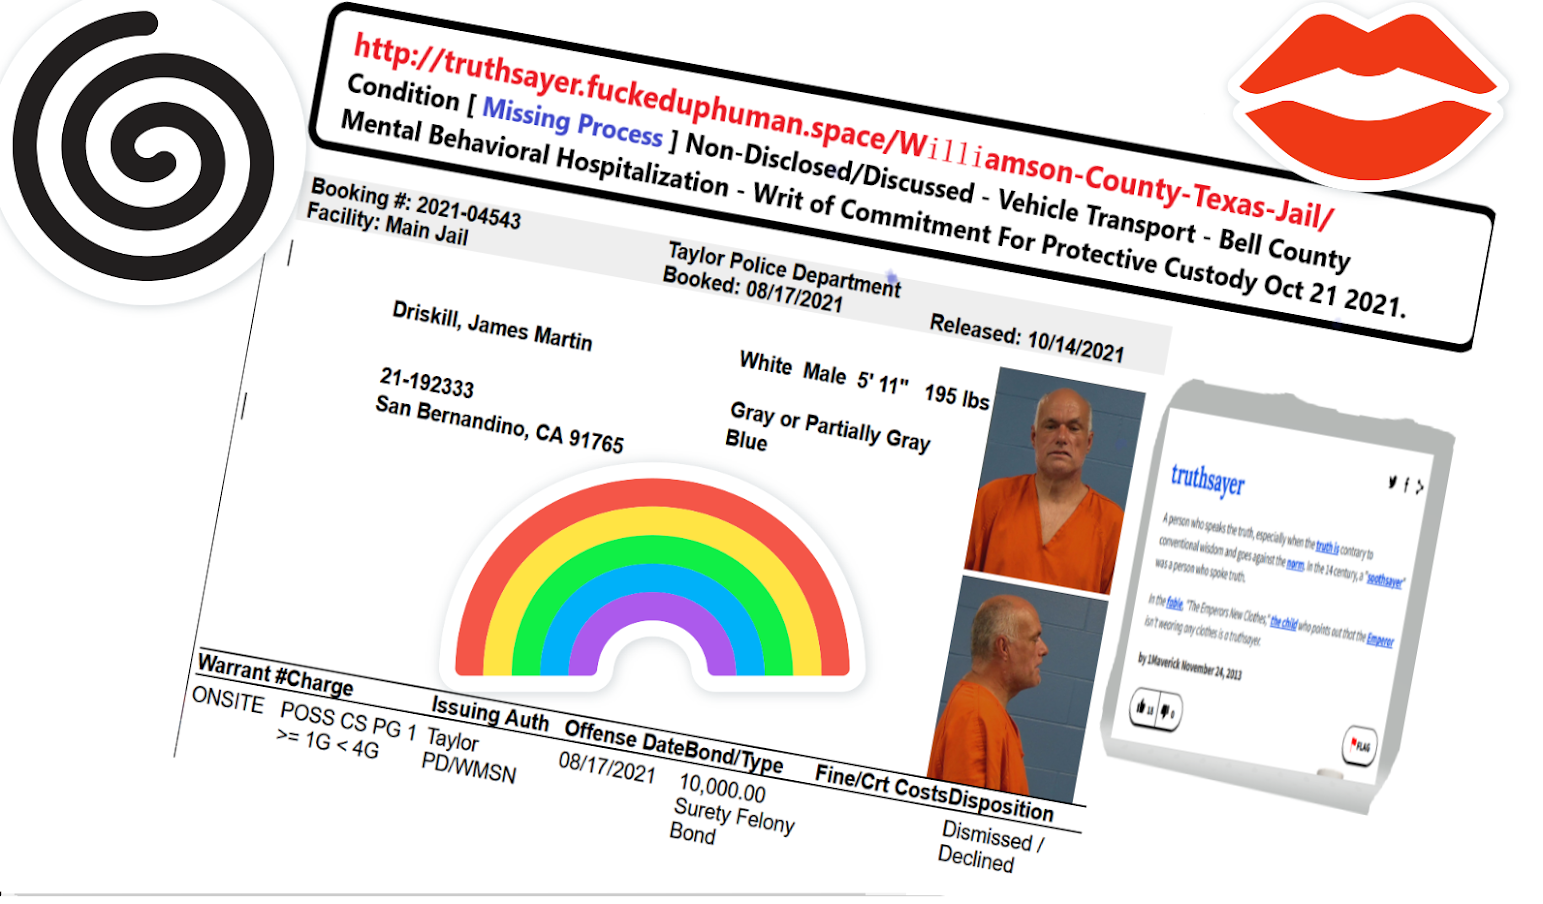 Lips - WilliamsonCountyJail - DischargedToOblivation -- Wow.png